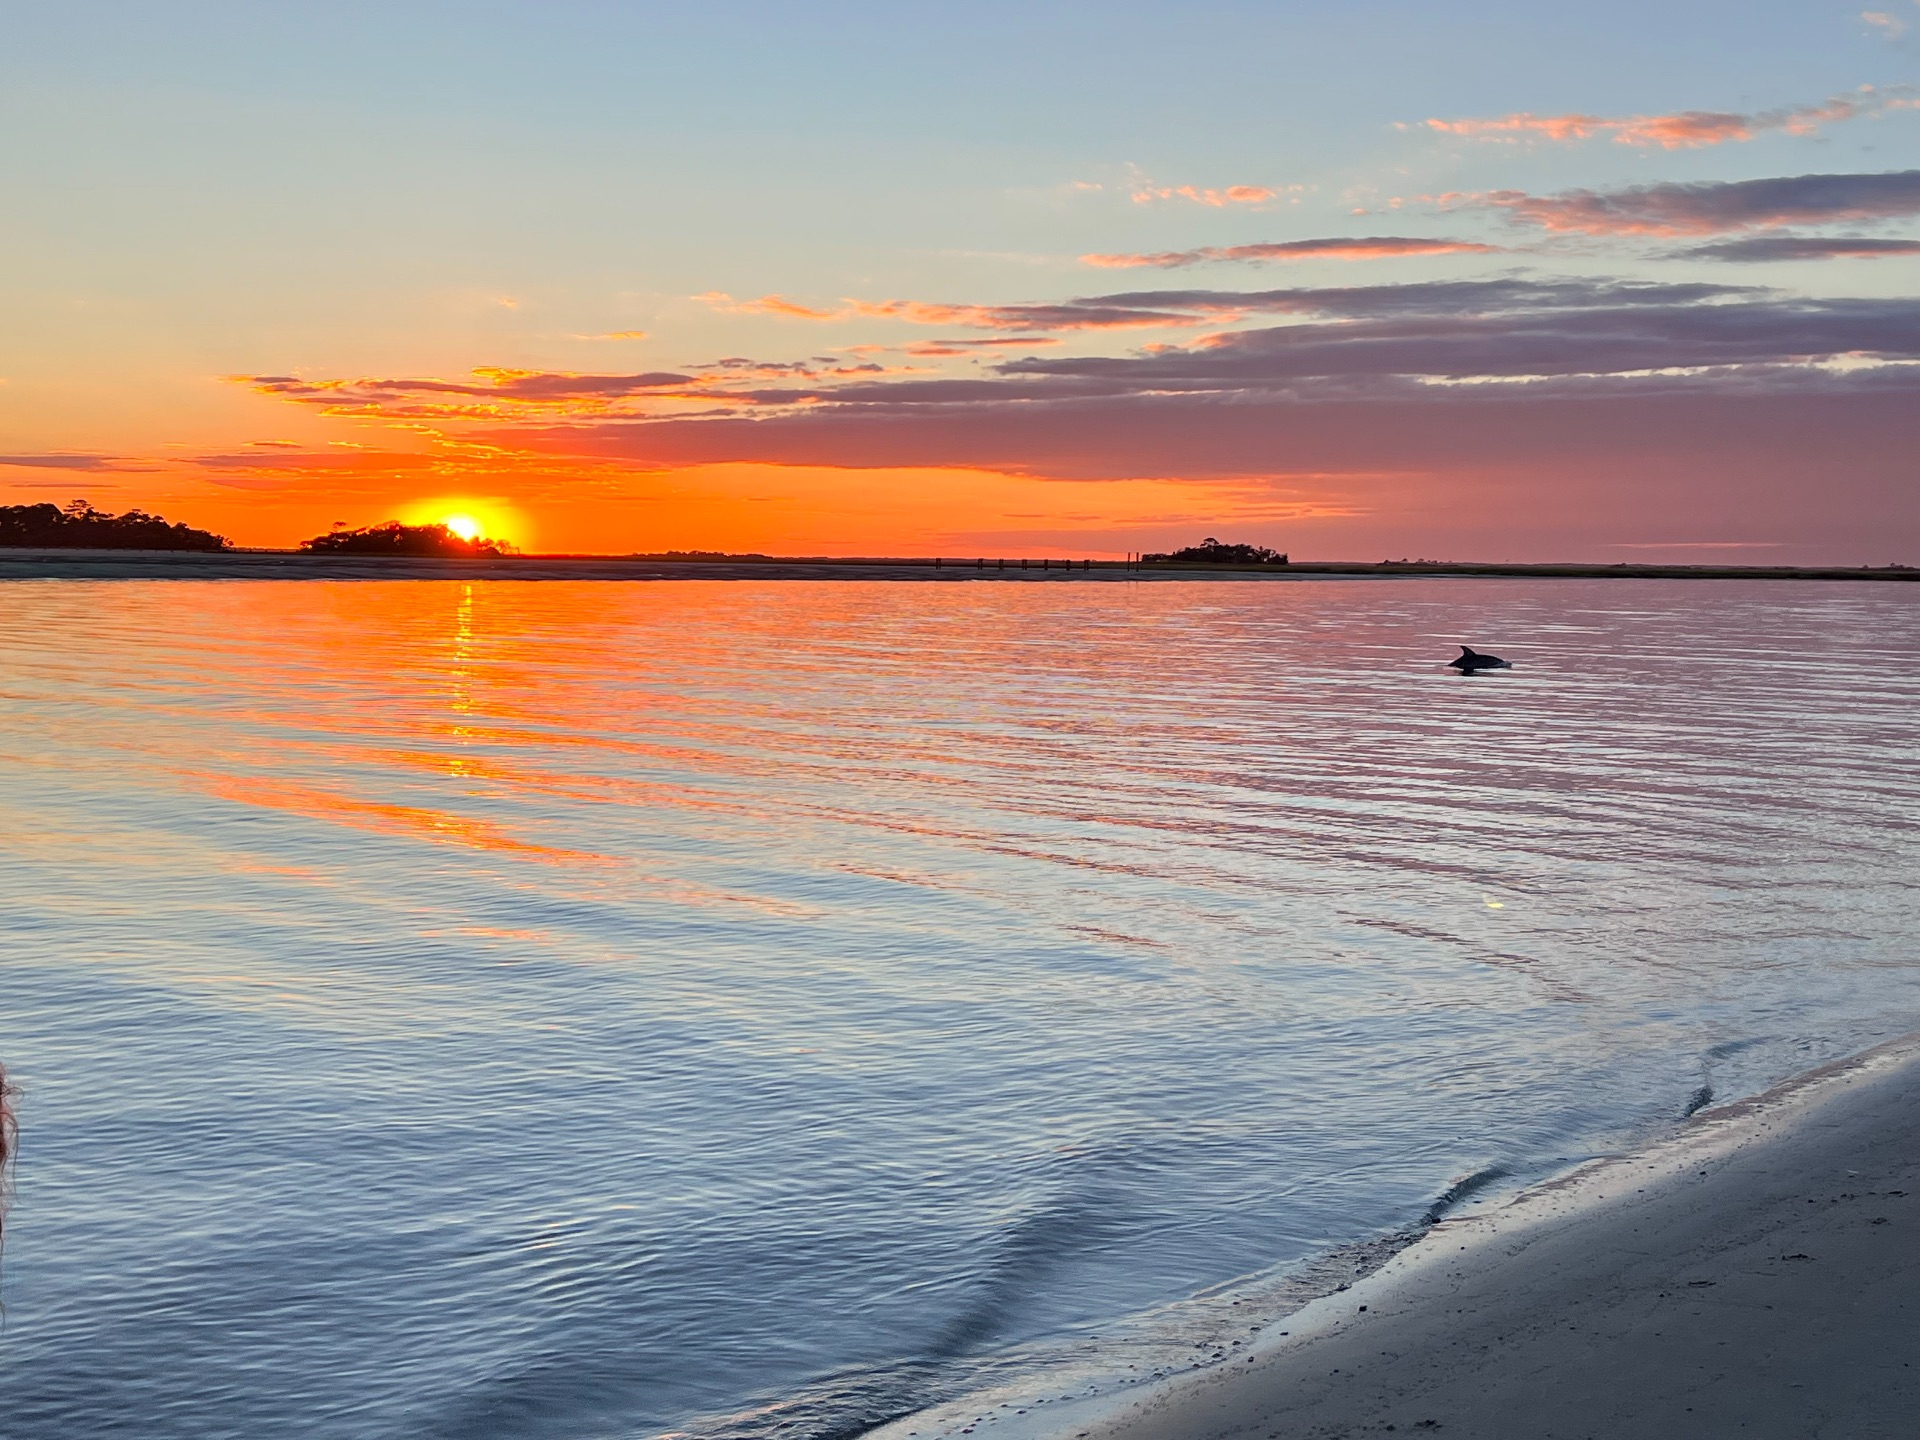 Dolphin and sunsets are beautiful at Fripp!